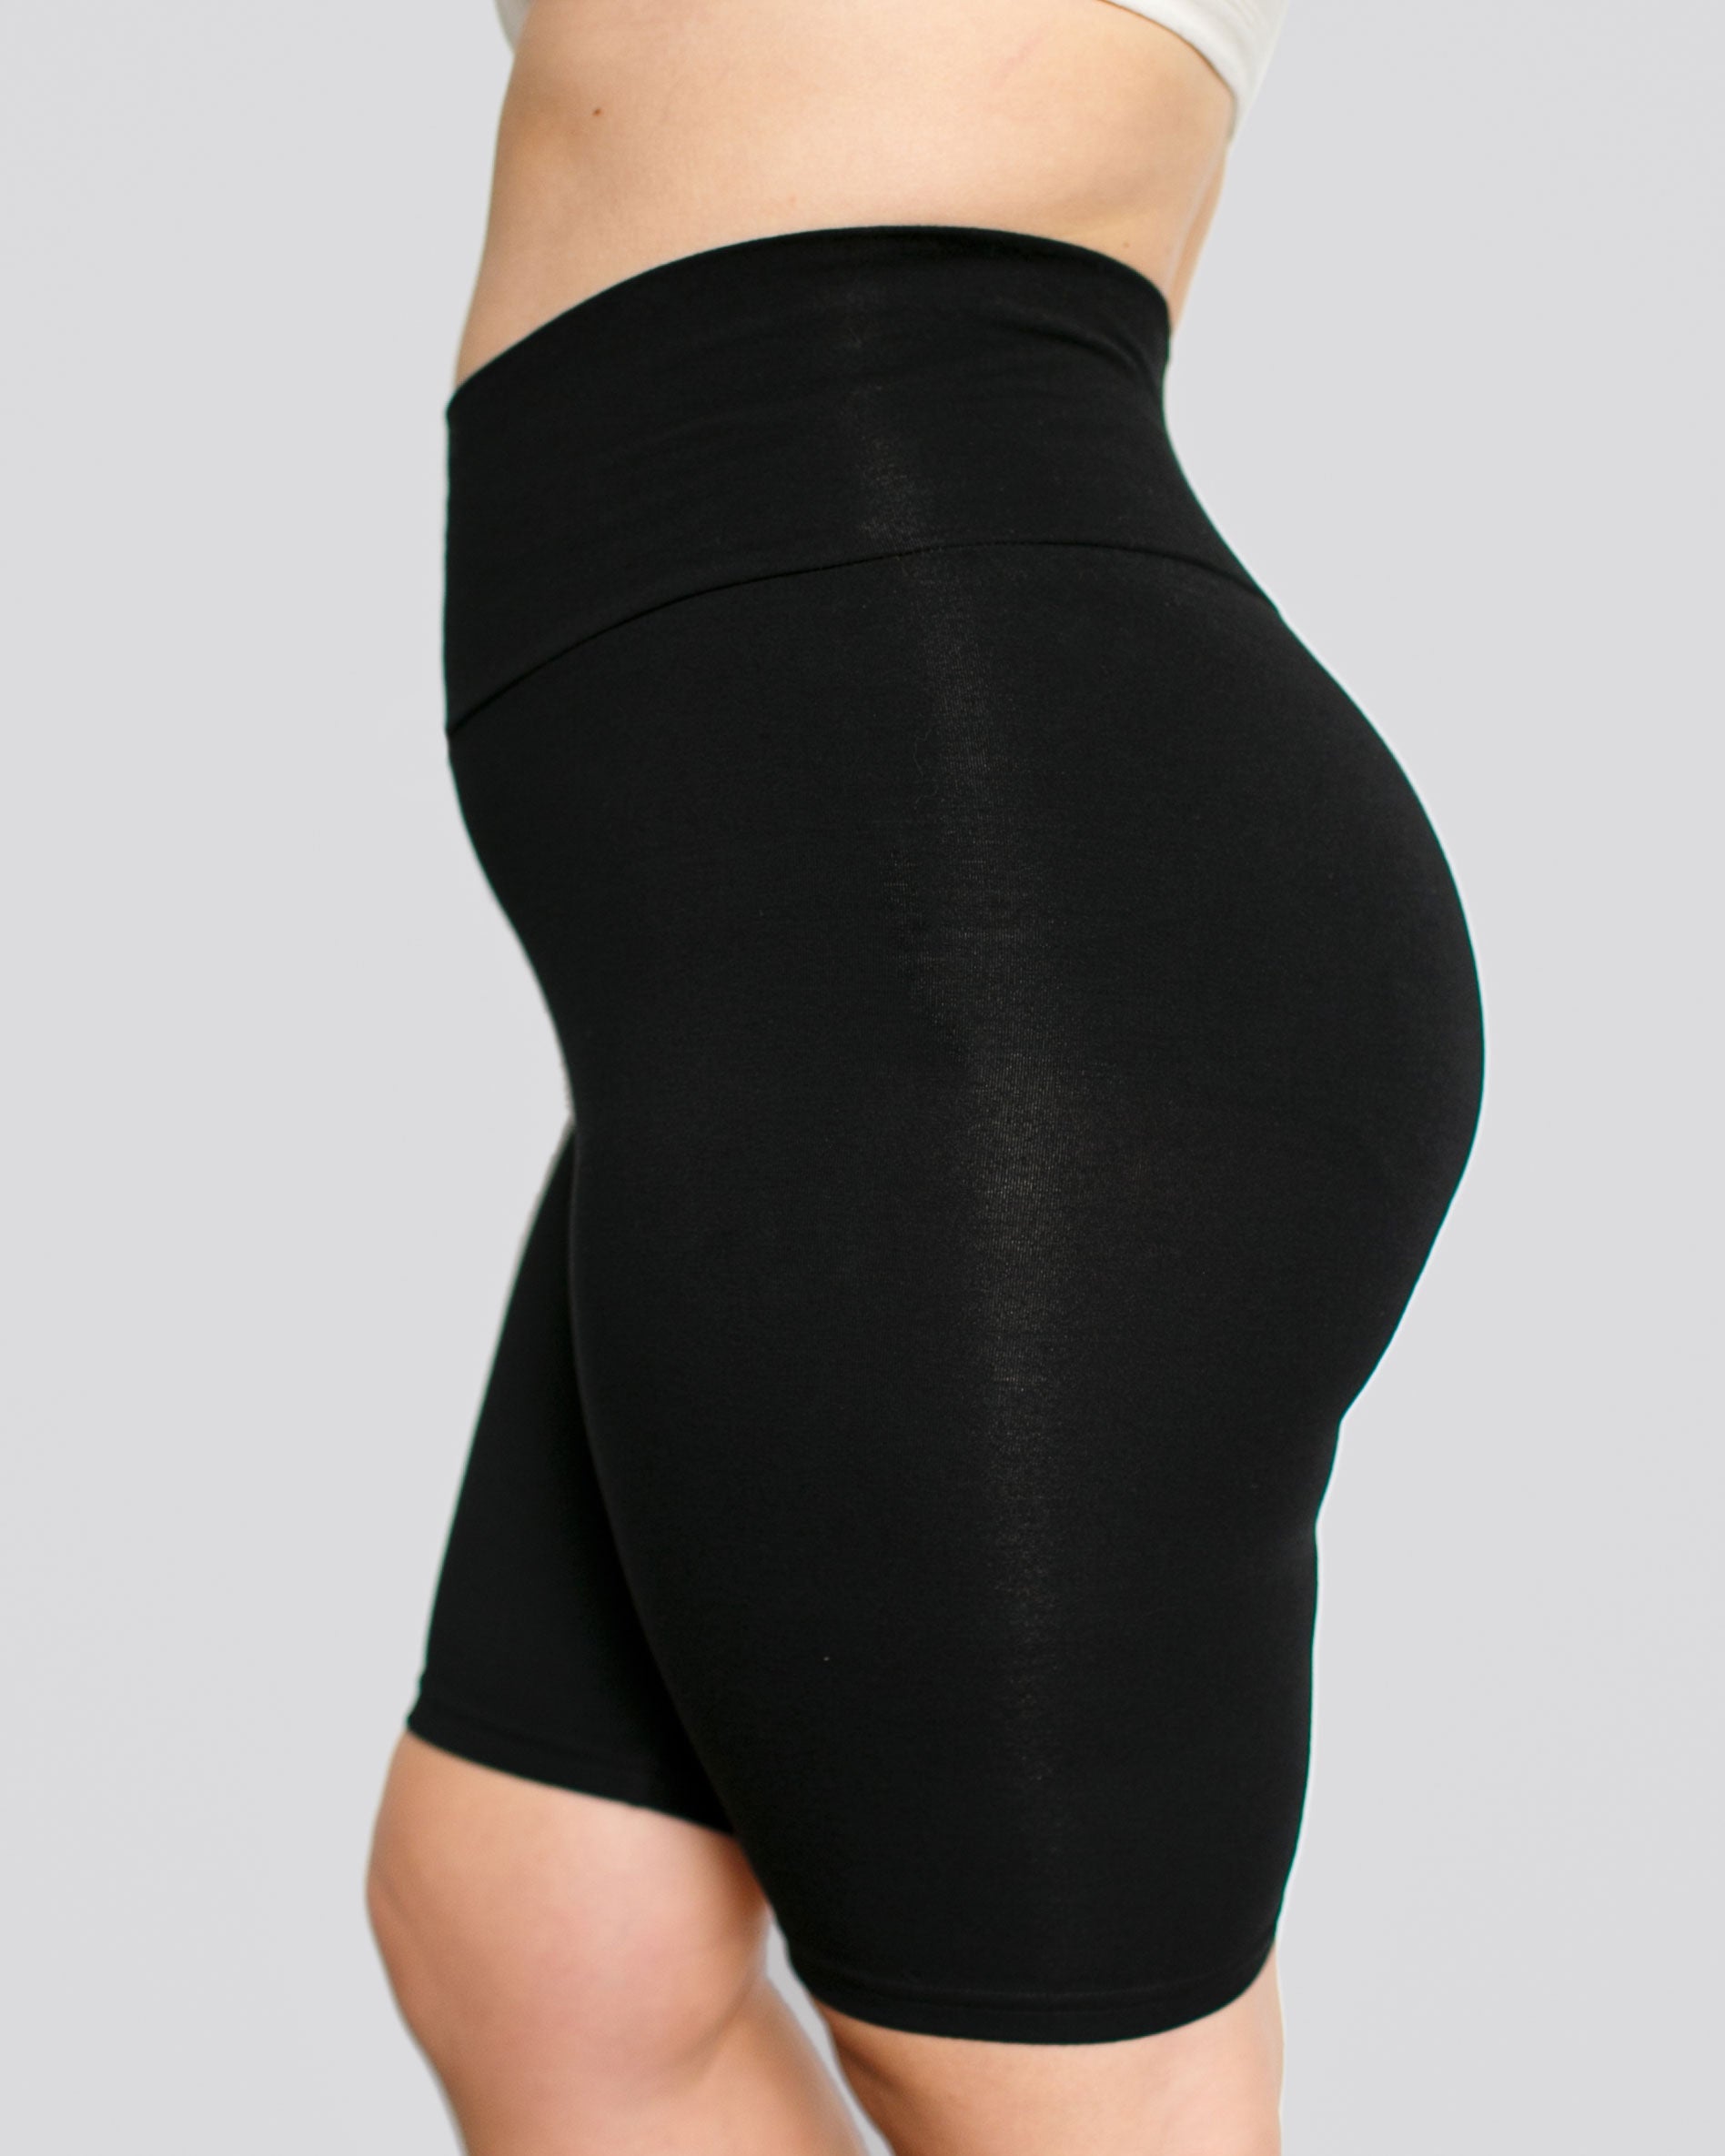 Side view of model wearing Thunderpants organic cotton High Rise Bike Shorts in plain Black color.